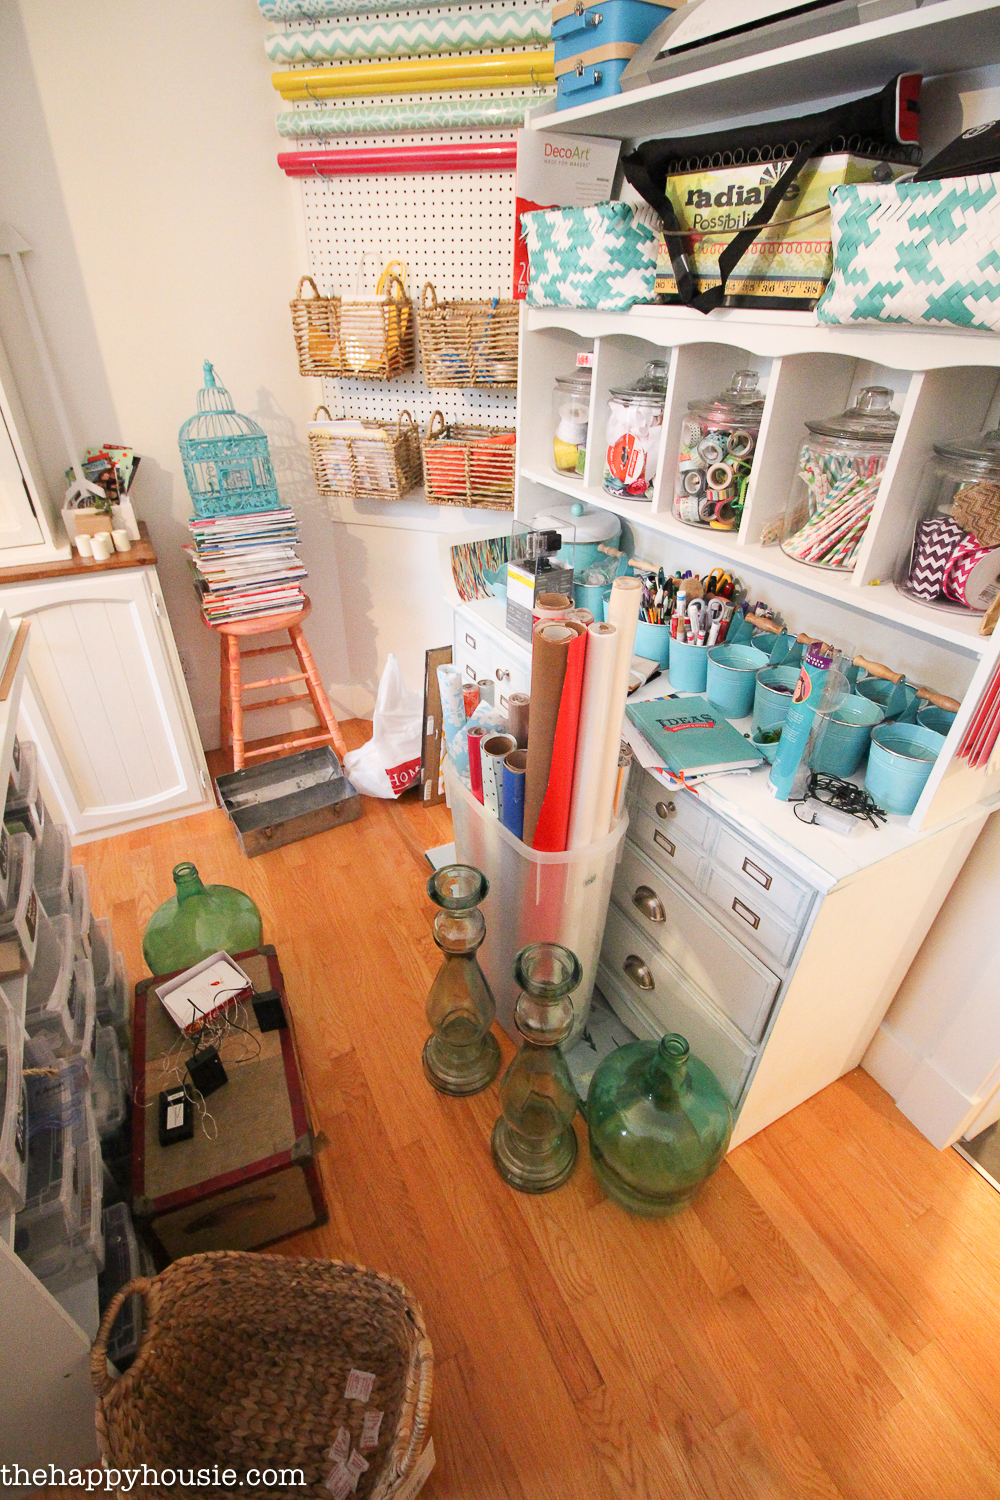 Organizing the space with jars and baskets.